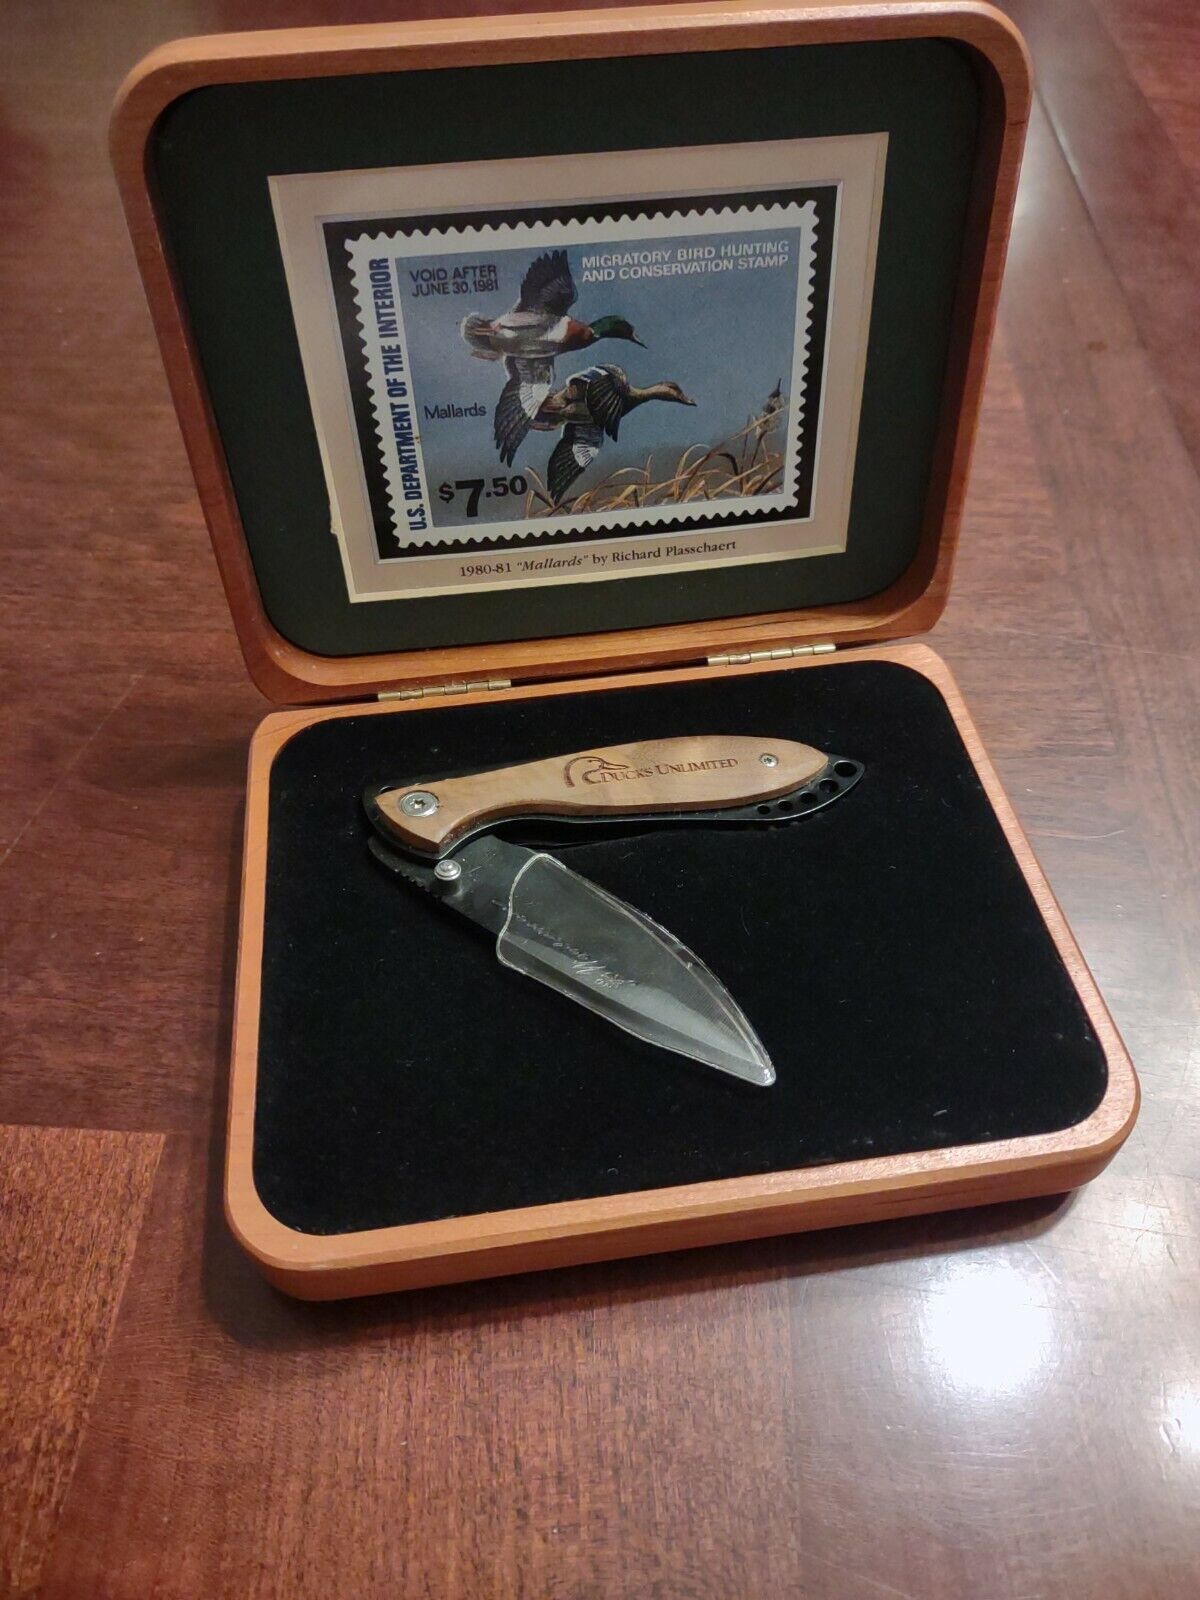 Ducks Unlimited Woodsman Collector's knife. Migratory Bird Hunting box